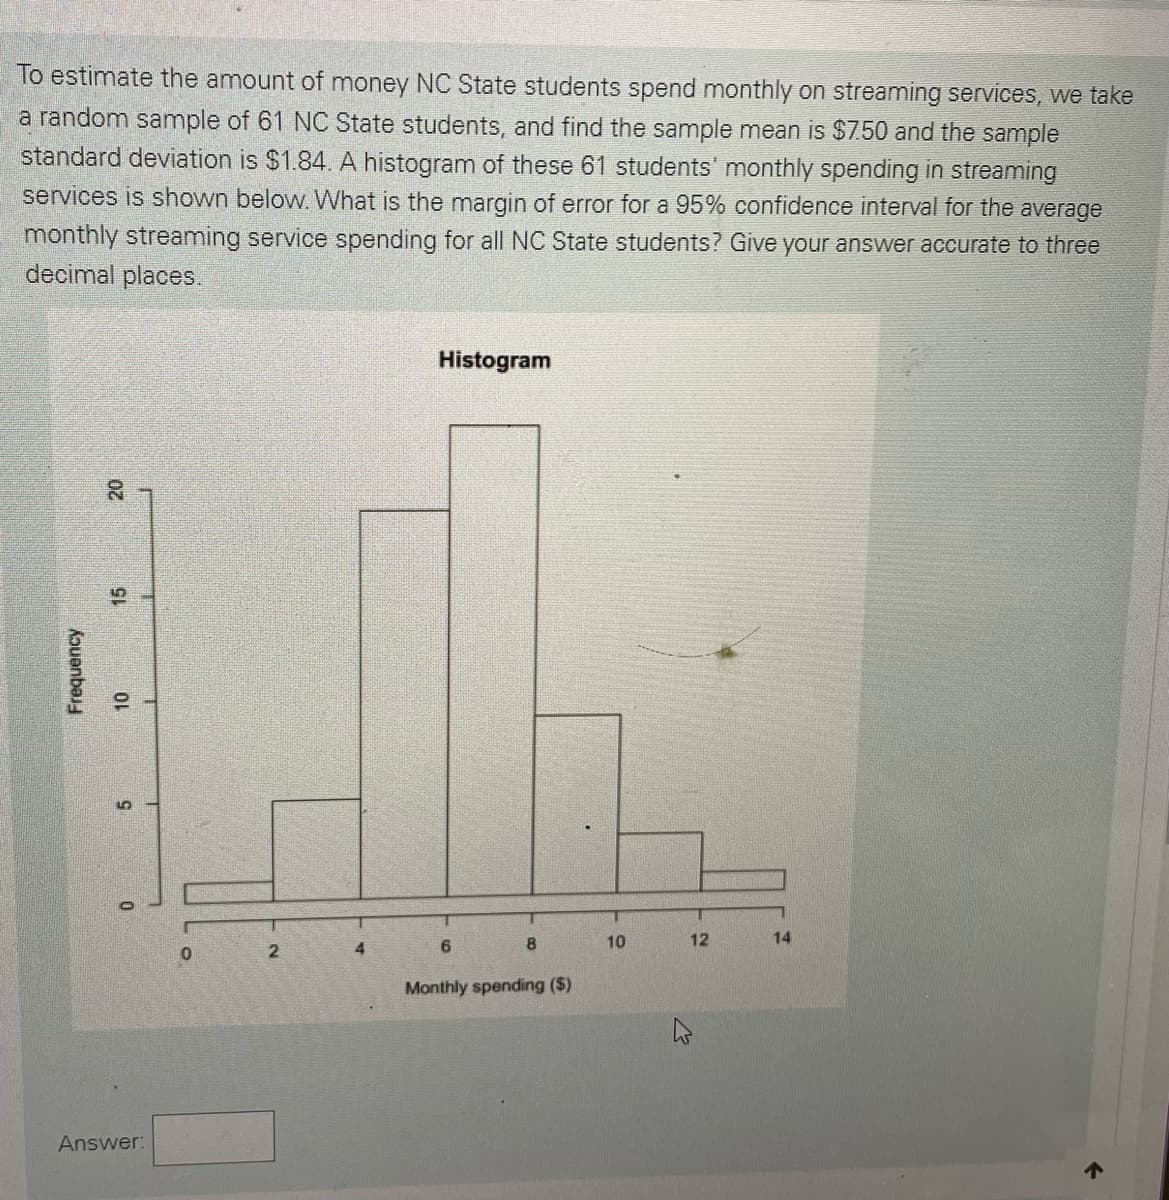 To estimate the amount of money NC State students spend monthly on streaming services, we take
a random sample of 61 NC State students, and find the sample mean is $7.50 and the sample
standard deviation is $1.84. A histogram of these 61 students' monthly spending in streaming
services is shown below.What is the margin of error for a 95% confidence interval for the average
monthly streaming service spending for all NC State students? Give your answer accurate to three
decimal places.
Histogram
20
10
4
6
10
12
14
Monthly spending ($)
Answer:
个
Kouanba
15
